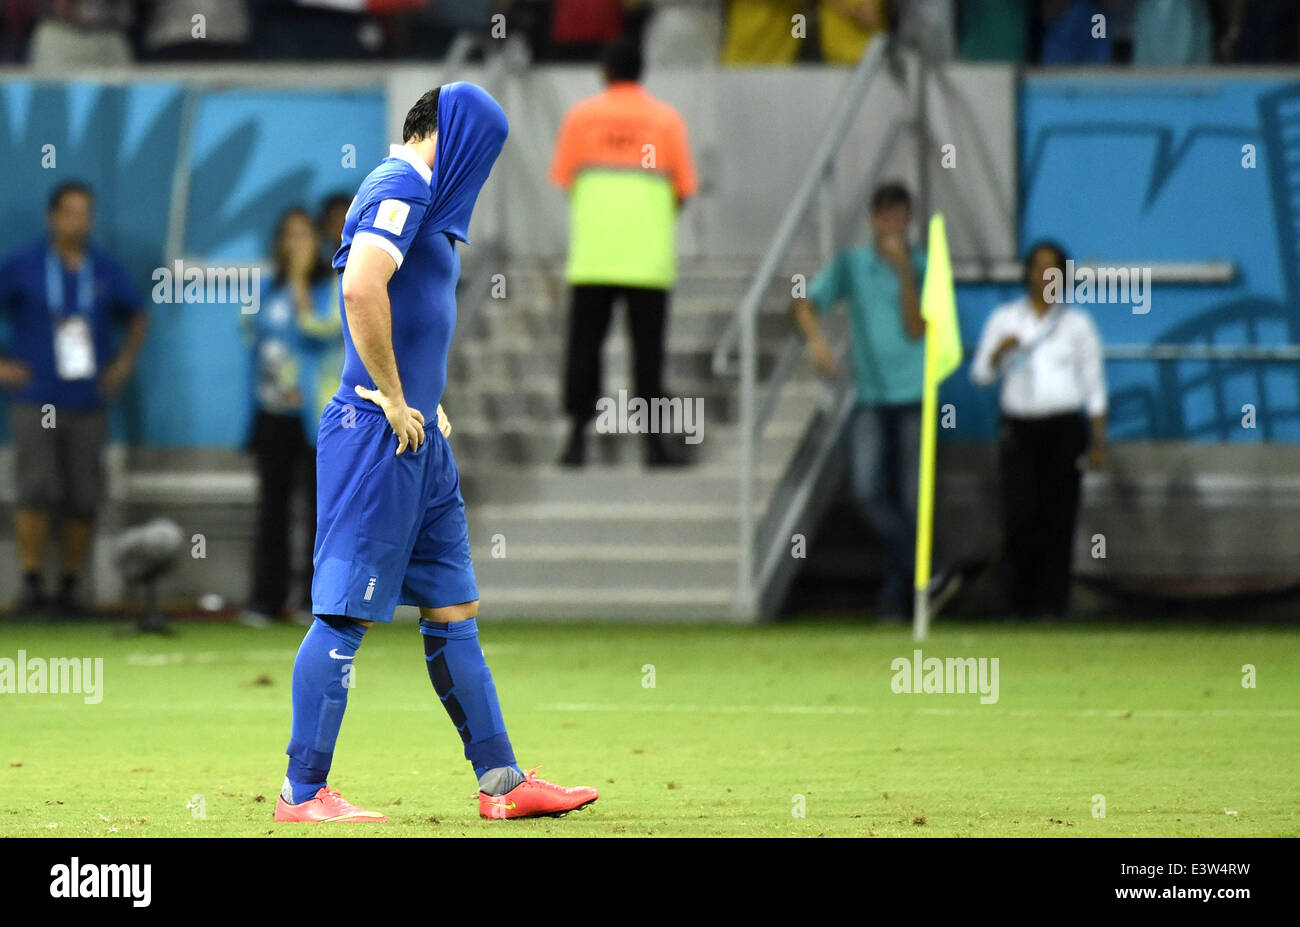 (140629) -- RECIFE, June 29, 2014 (Xinhua) -- Greece's Theofanis Gekas reacts after missing a penalty kick during the penalty shoot-out of a Round of 16 match between Costa Rica and Greece of 2014 FIFA World Cup at the Arena Pernambuco Stadium in Recife, Brazil, on June 29, 2014. Costa Rica won 6-4 (5-3 in penalties) over Greece and qualified for quarter-finals on Sunday. (Xinhua/Lui Siu Wai)(pcy) Stock Photo